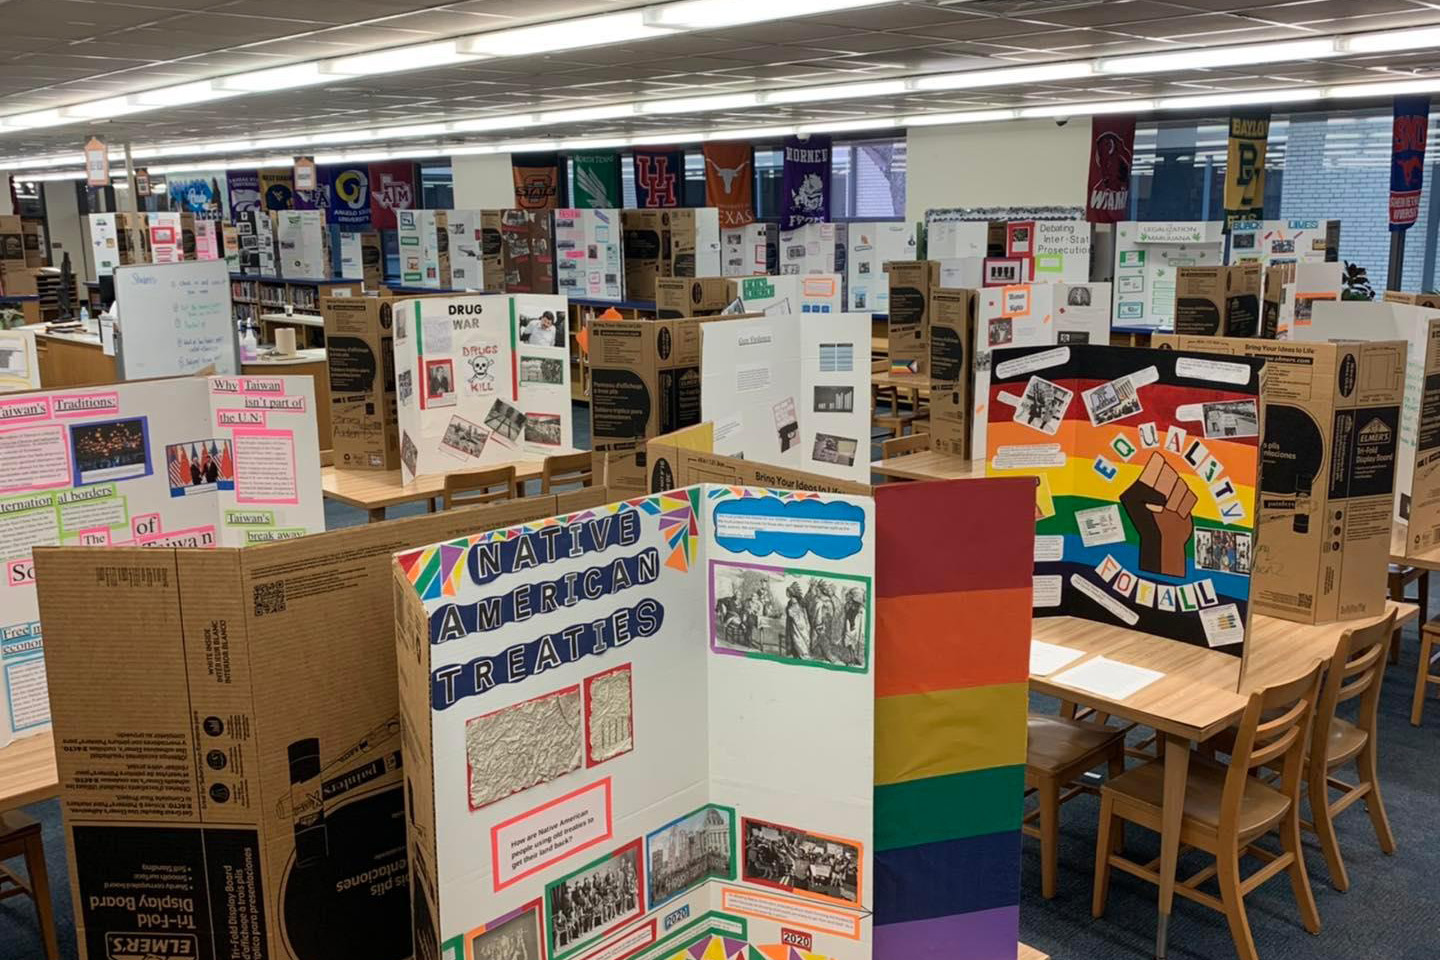 Research exhibits created by Estacado Early College High School students.